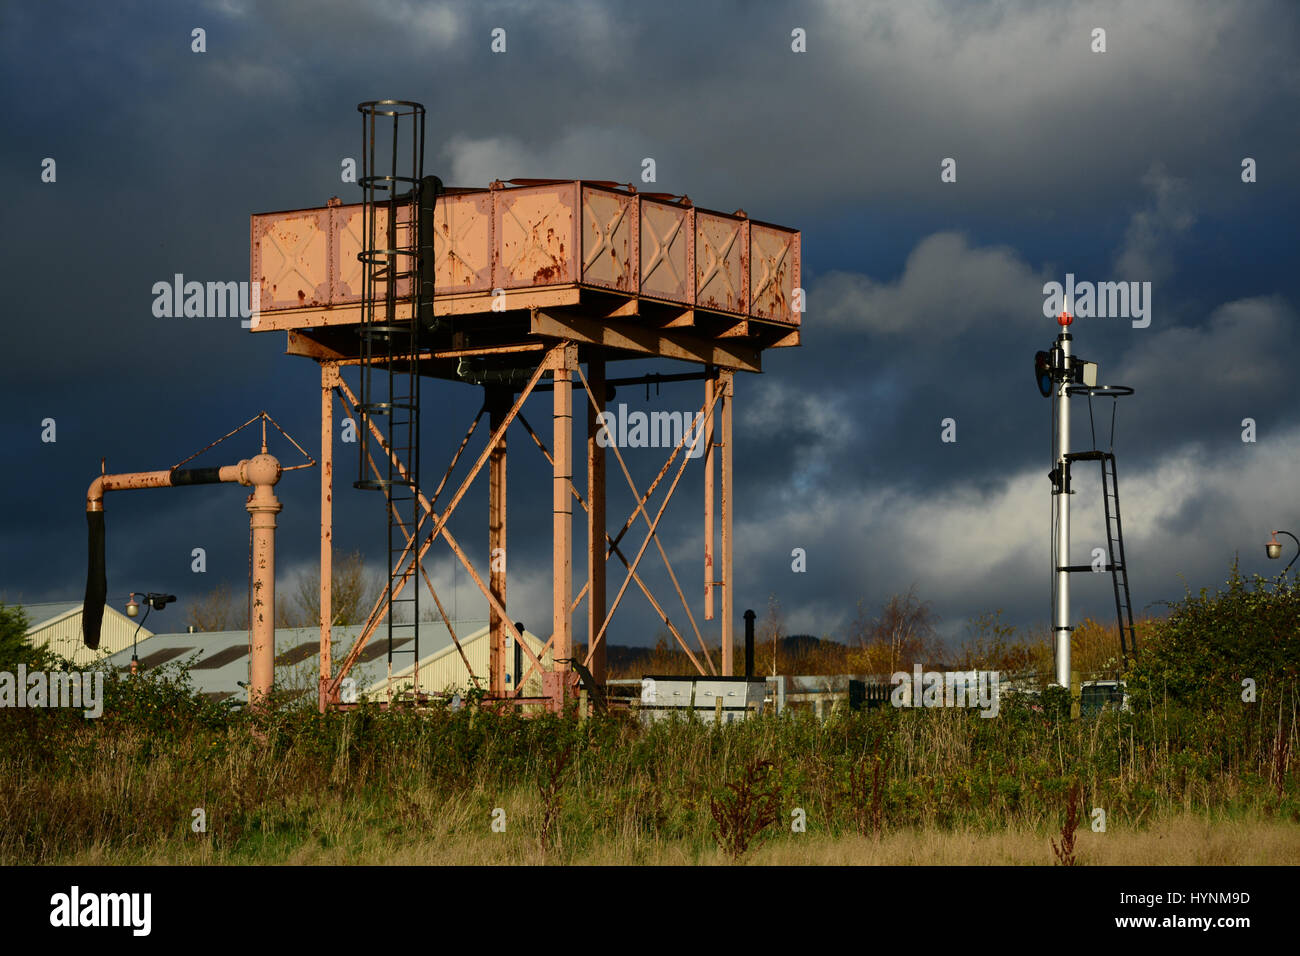 The Old Water Tank At Bishops Lydeard Railway Station, UK Stock Photo